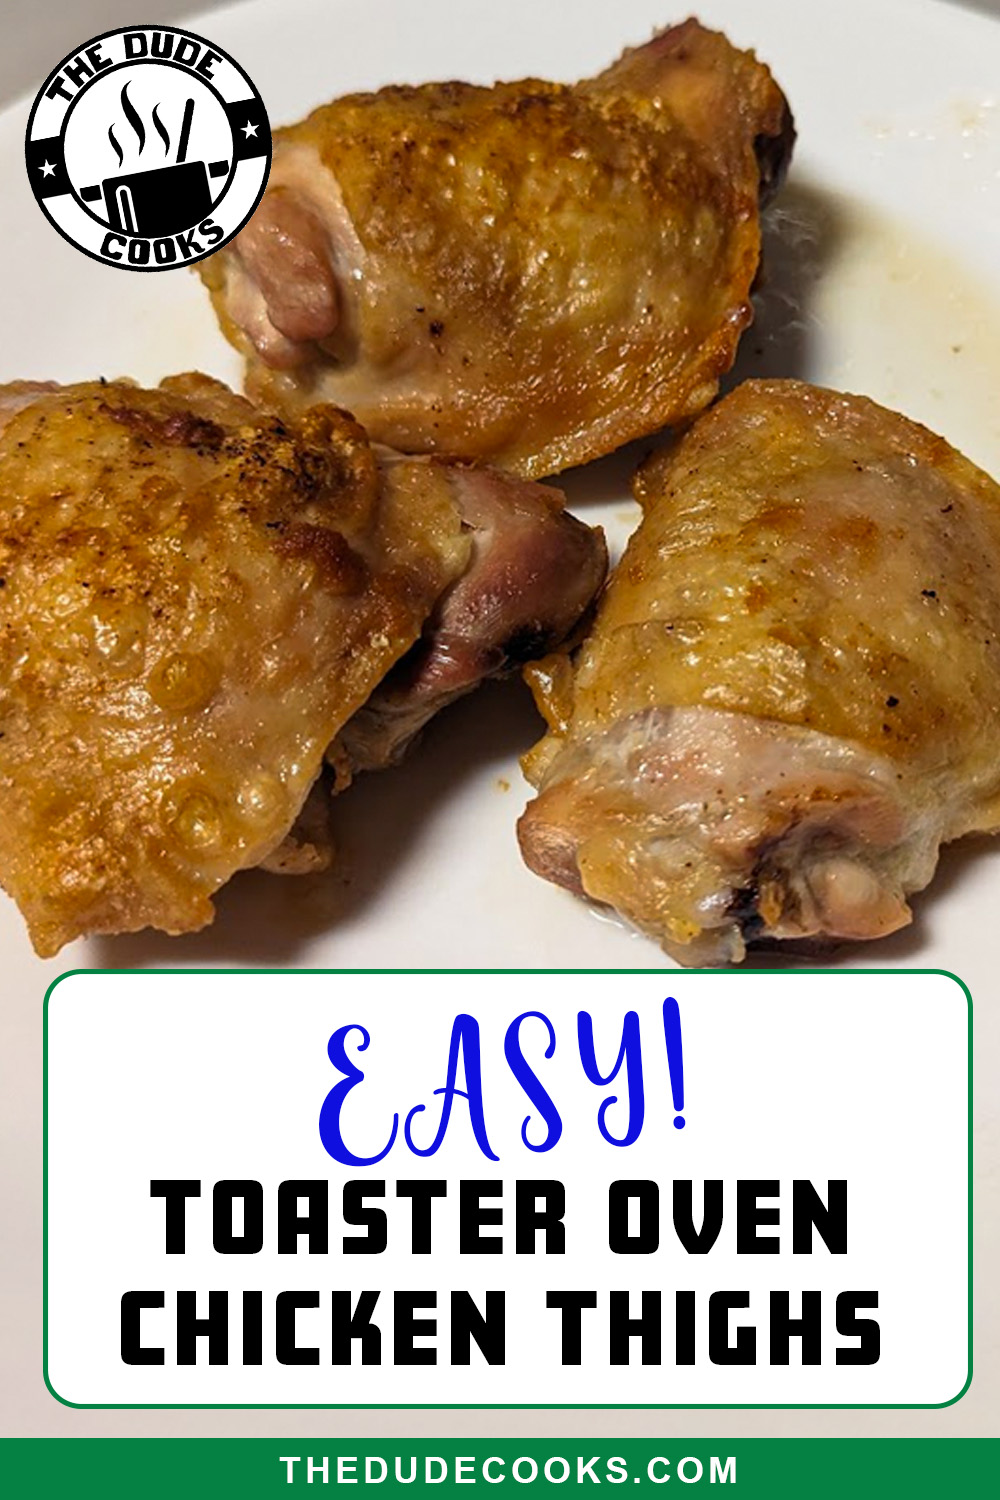 Crispy chicken thighs in the toaster oven recipe.